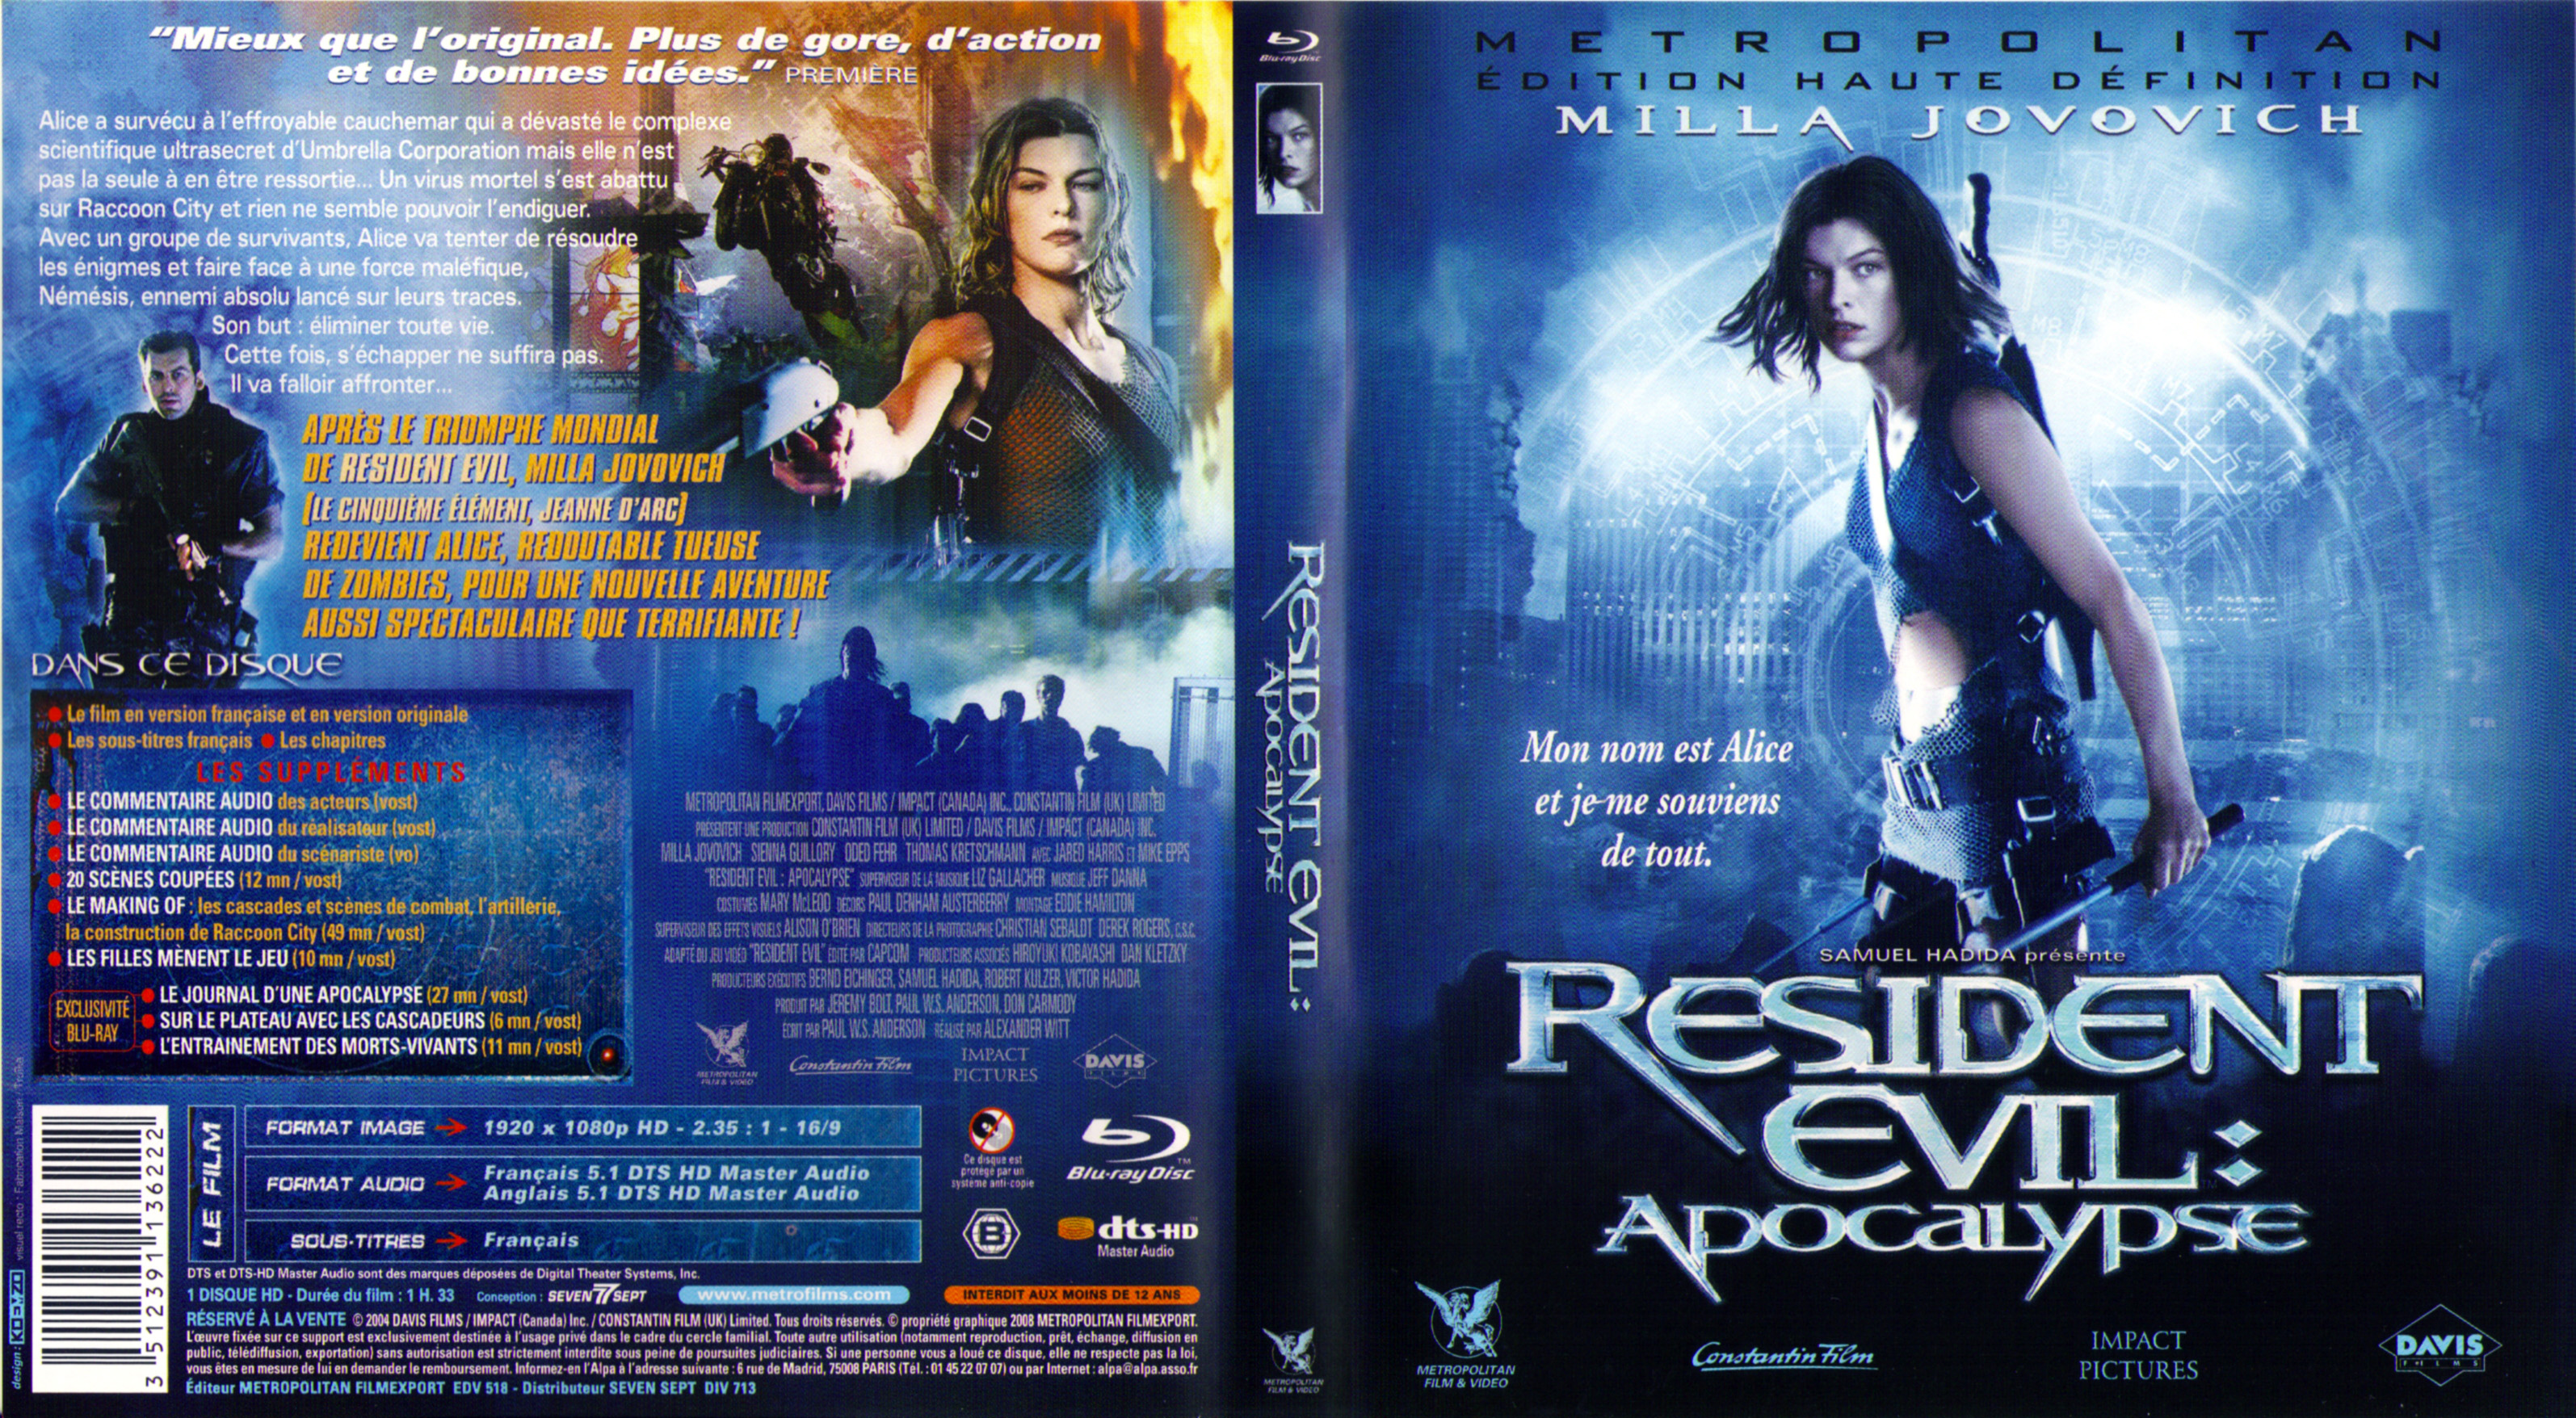 Jaquette DVD Resident Evil Apocalypse (BLU-RAY)